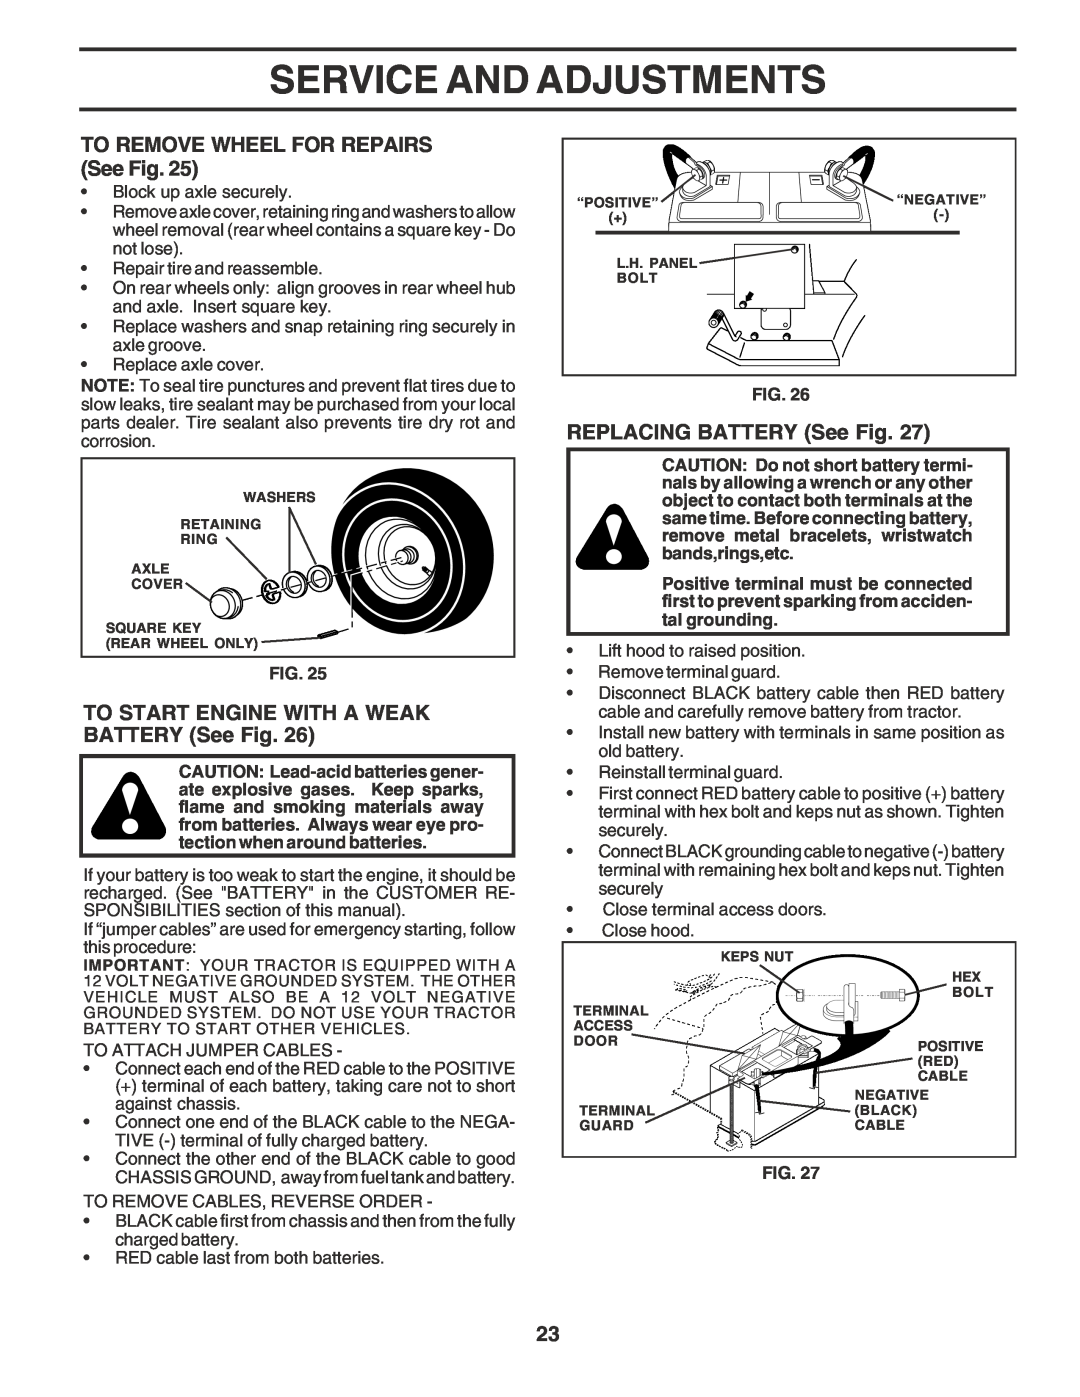 Poulan PR20PH42STA owner manual TO REMOVE WHEEL FOR REPAIRS See Fig, TO START ENGINE WITH A WEAK BATTERY See Fig 